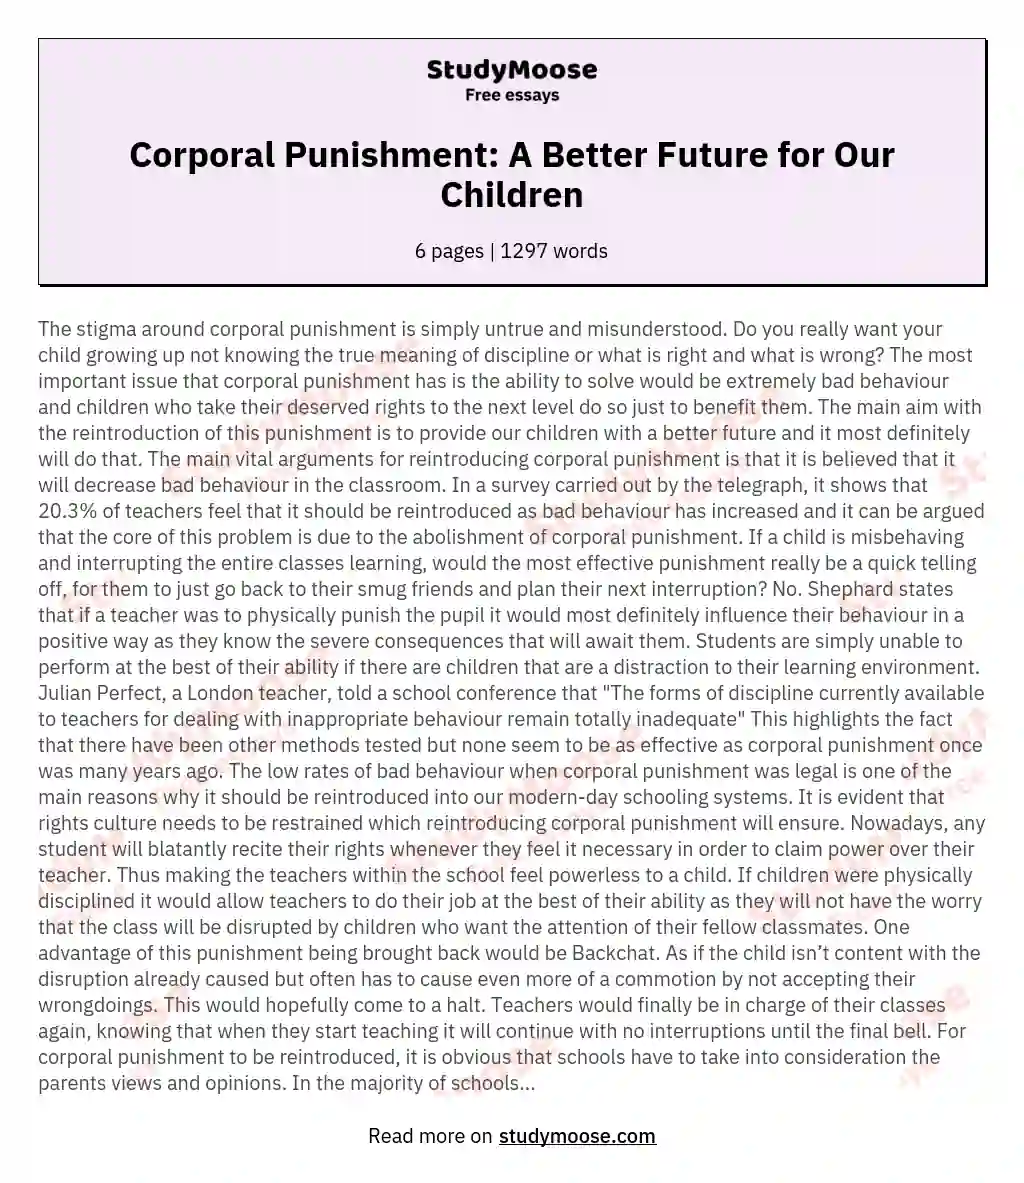 corporal punishment is good or bad essay